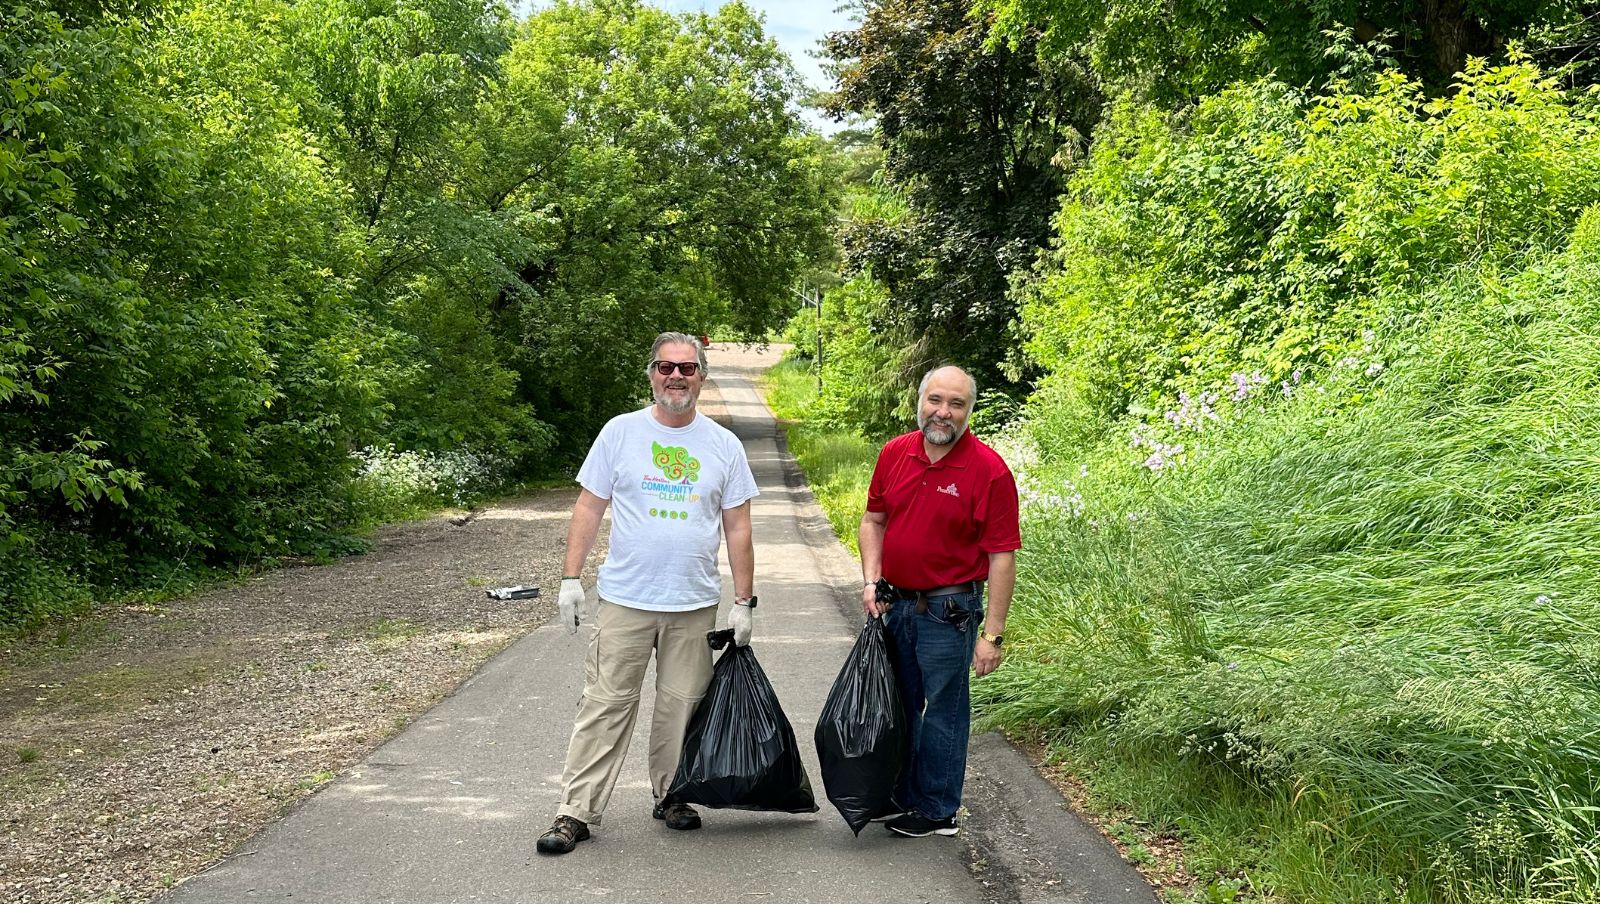 Two men with garbage bags on an outdoor path.